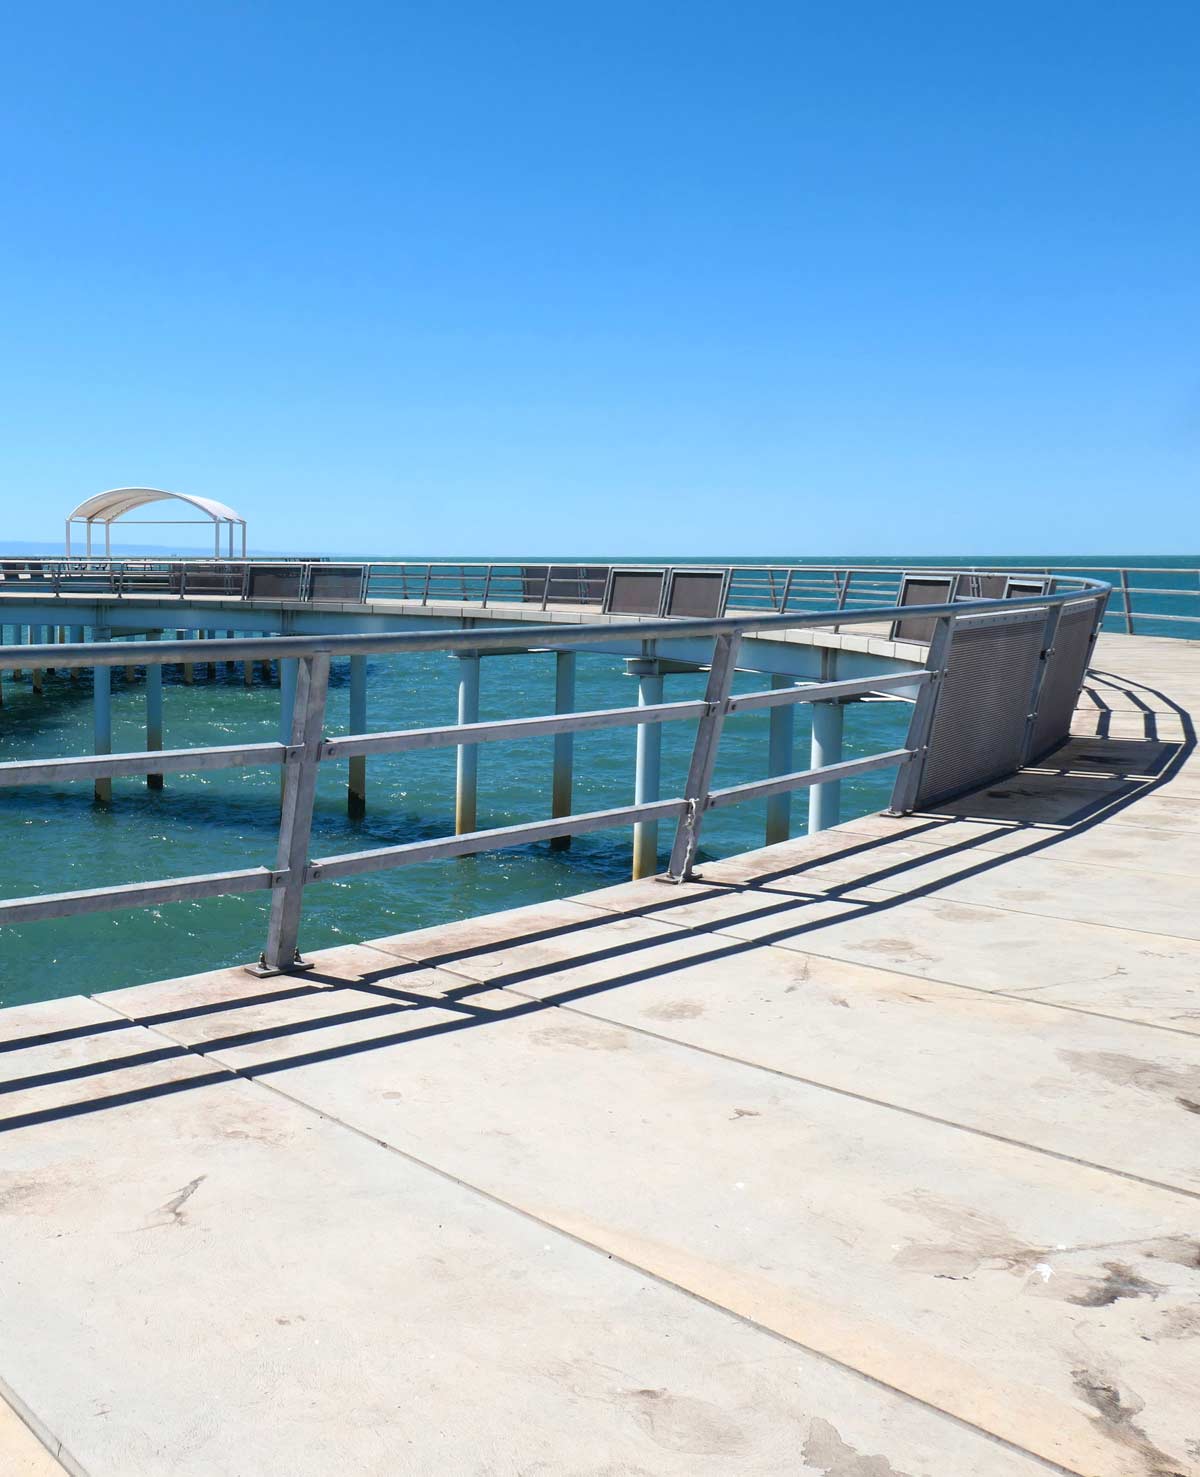 The Whyalla Circular Jetty. Eyre Peninsula, South Australia